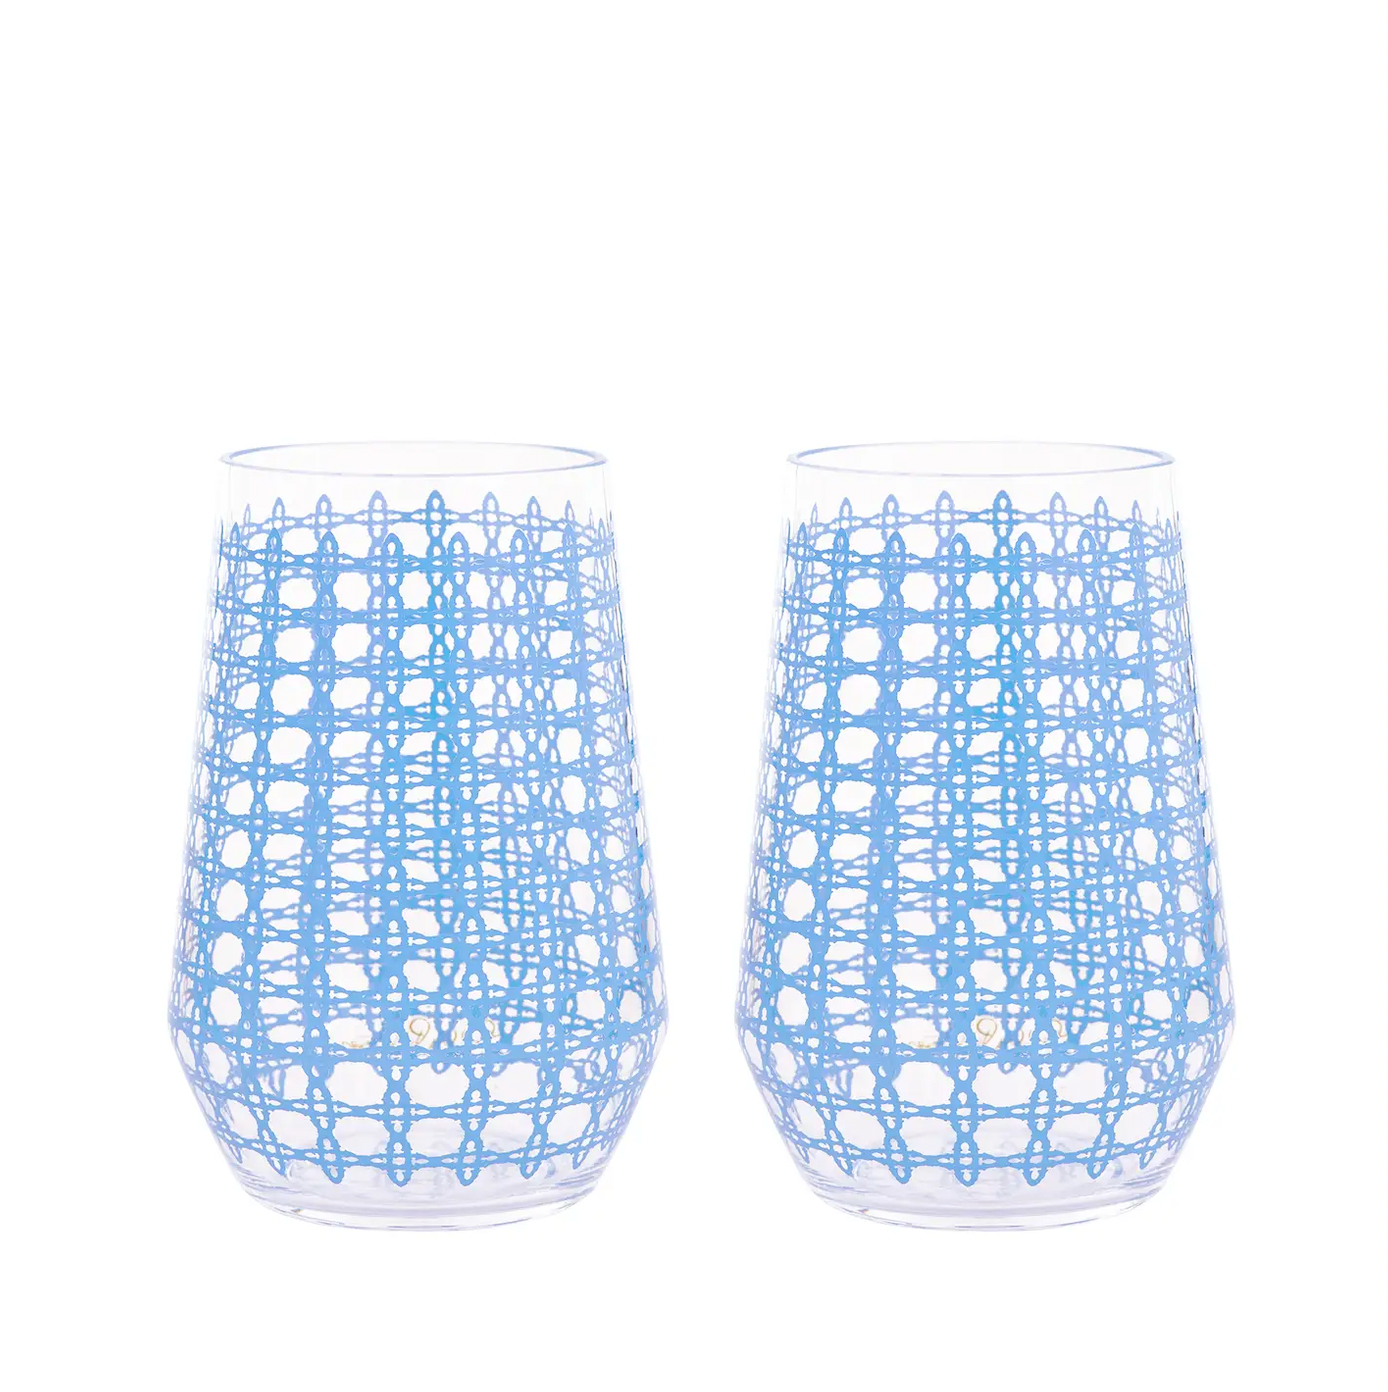 Lilly Pulitzer Acrylic Wine Glass Set - Frenchie Blue Caning